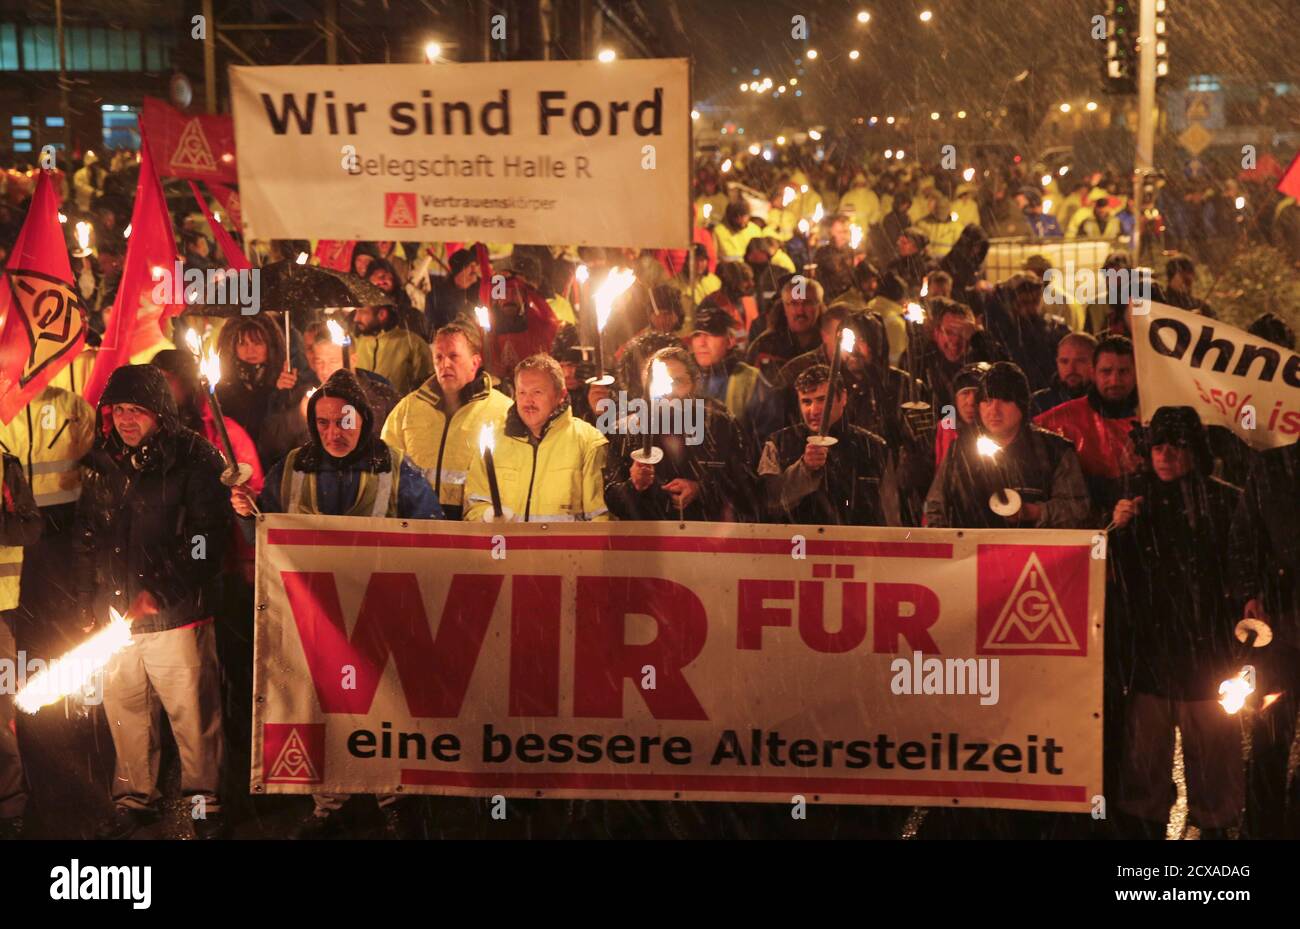 Snow falls as night shift workers of the Ford car factory in the Cologne suburb of Niehl, hold flaming torches during a temporary walkout for higher wages by Germany's engineering and metal workers union IG Metall early January 29, 2015. The union is demanding a 5.5 percent increase in salaries while employers have offered 2.2 percent. Any deal would have implications for wage negotiations in other German sectors and abroad. The banner in front reads 'We for better partial retirement', and the banner at rear reads 'We are Ford'. REUTERS/Wolfgang Rattay (GERMANY - Tags: TRANSPORT BUSINESS EMPLO Stock Photo